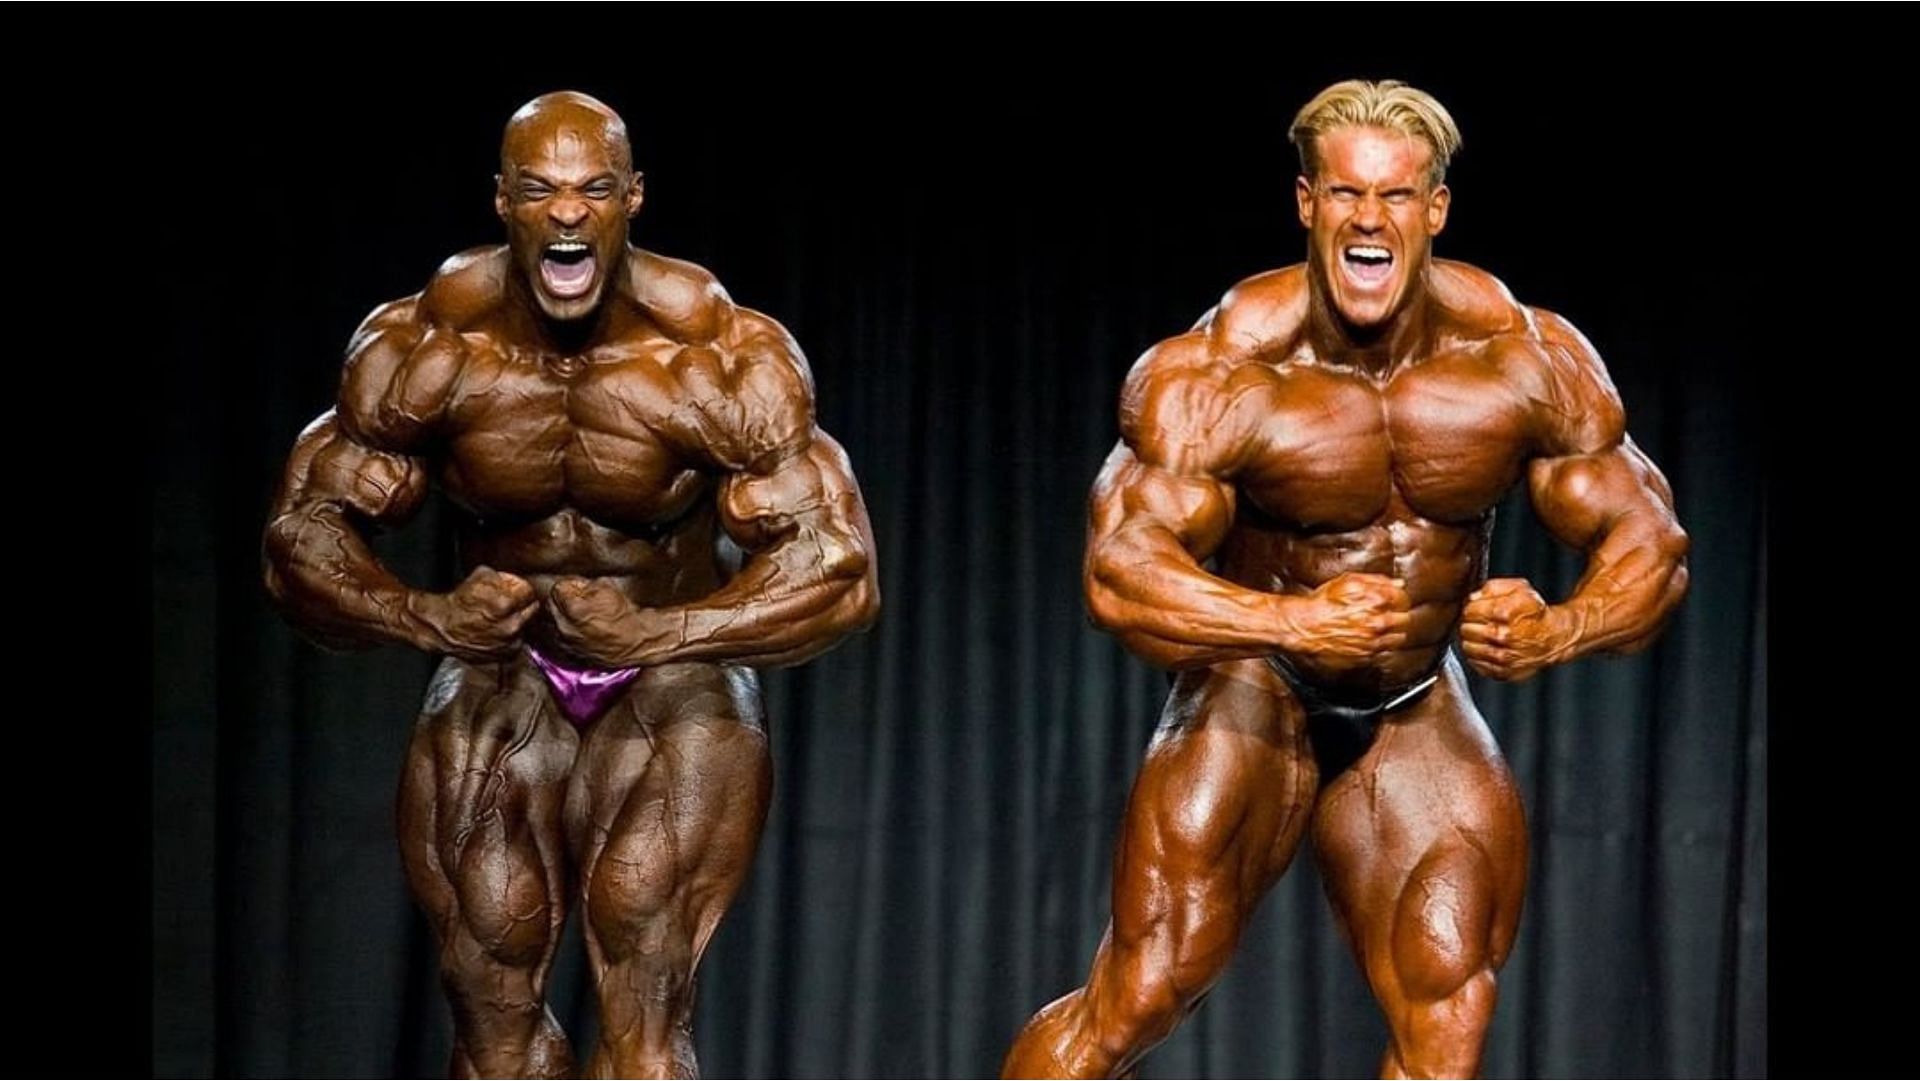 Bodybuilders who admitted to taking steroids. (Via Ronnie Coleman